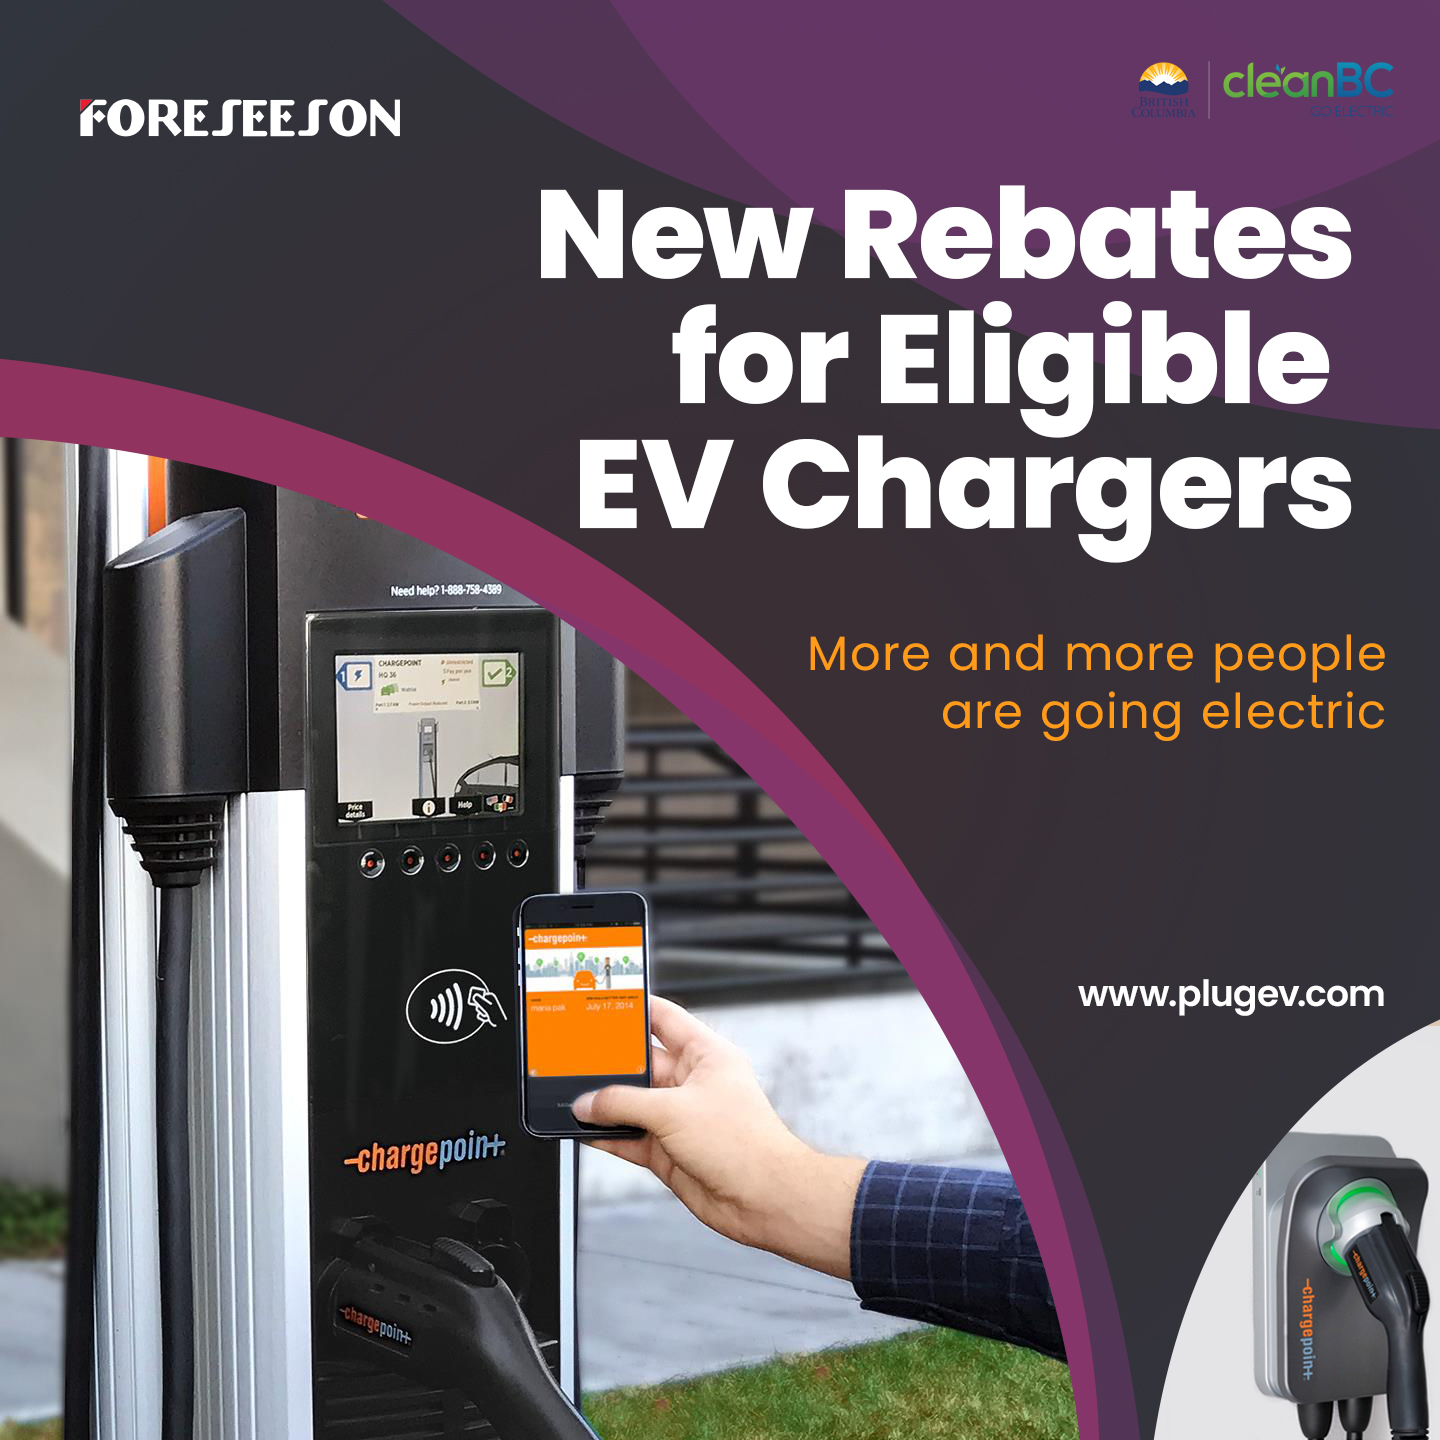 B.C. Introduced New Rebates for EV Chargers Foreseeson EVSE